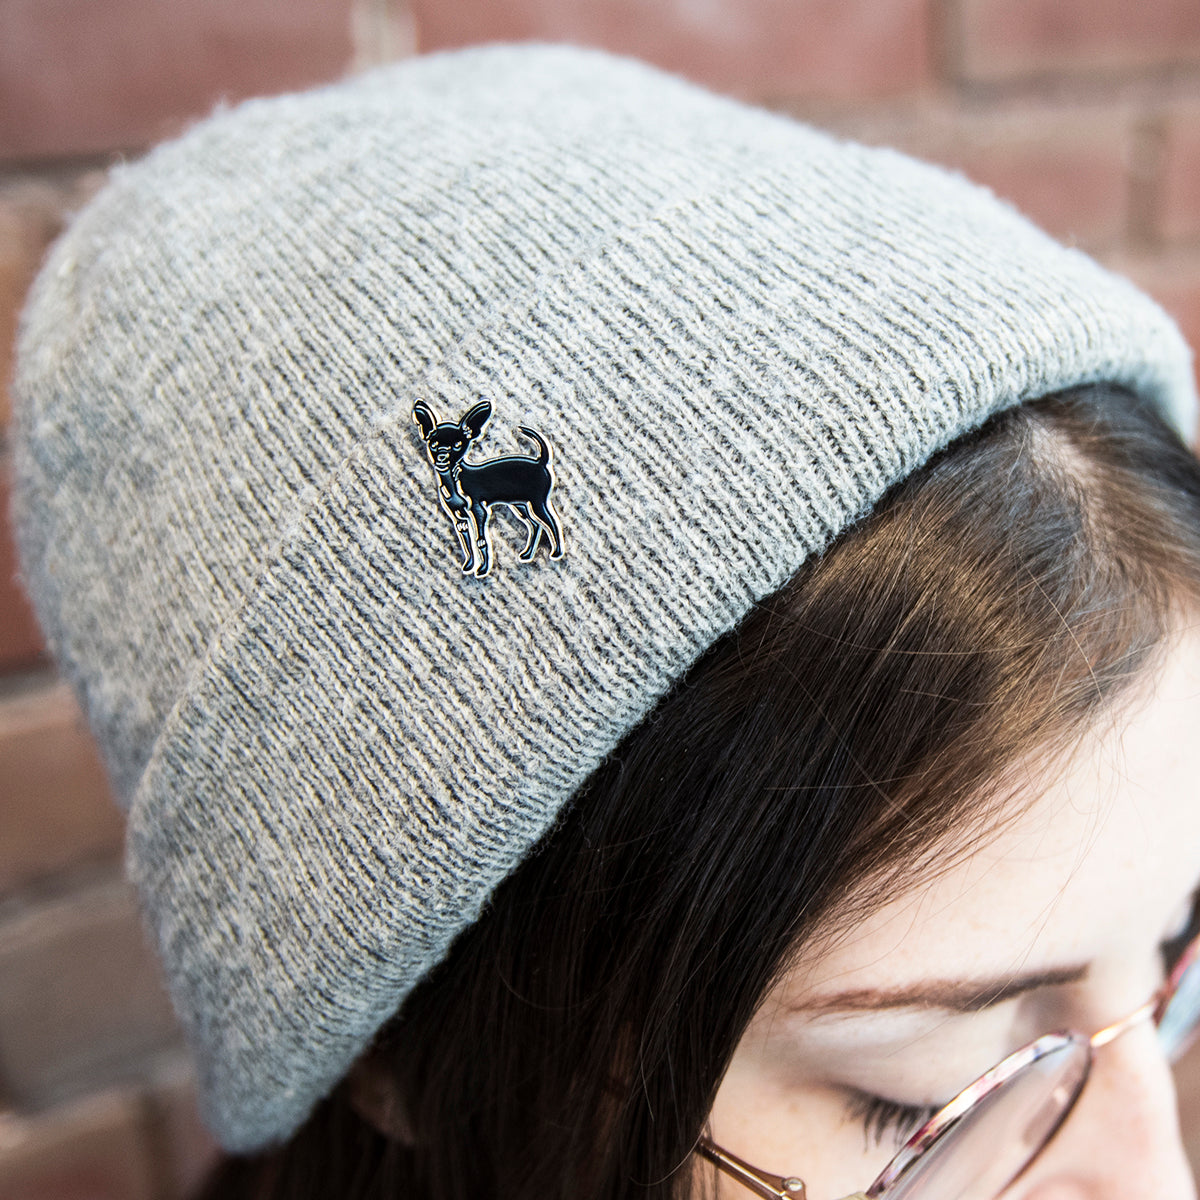 black chihuahua enamel pin featured on a grey beanie hat